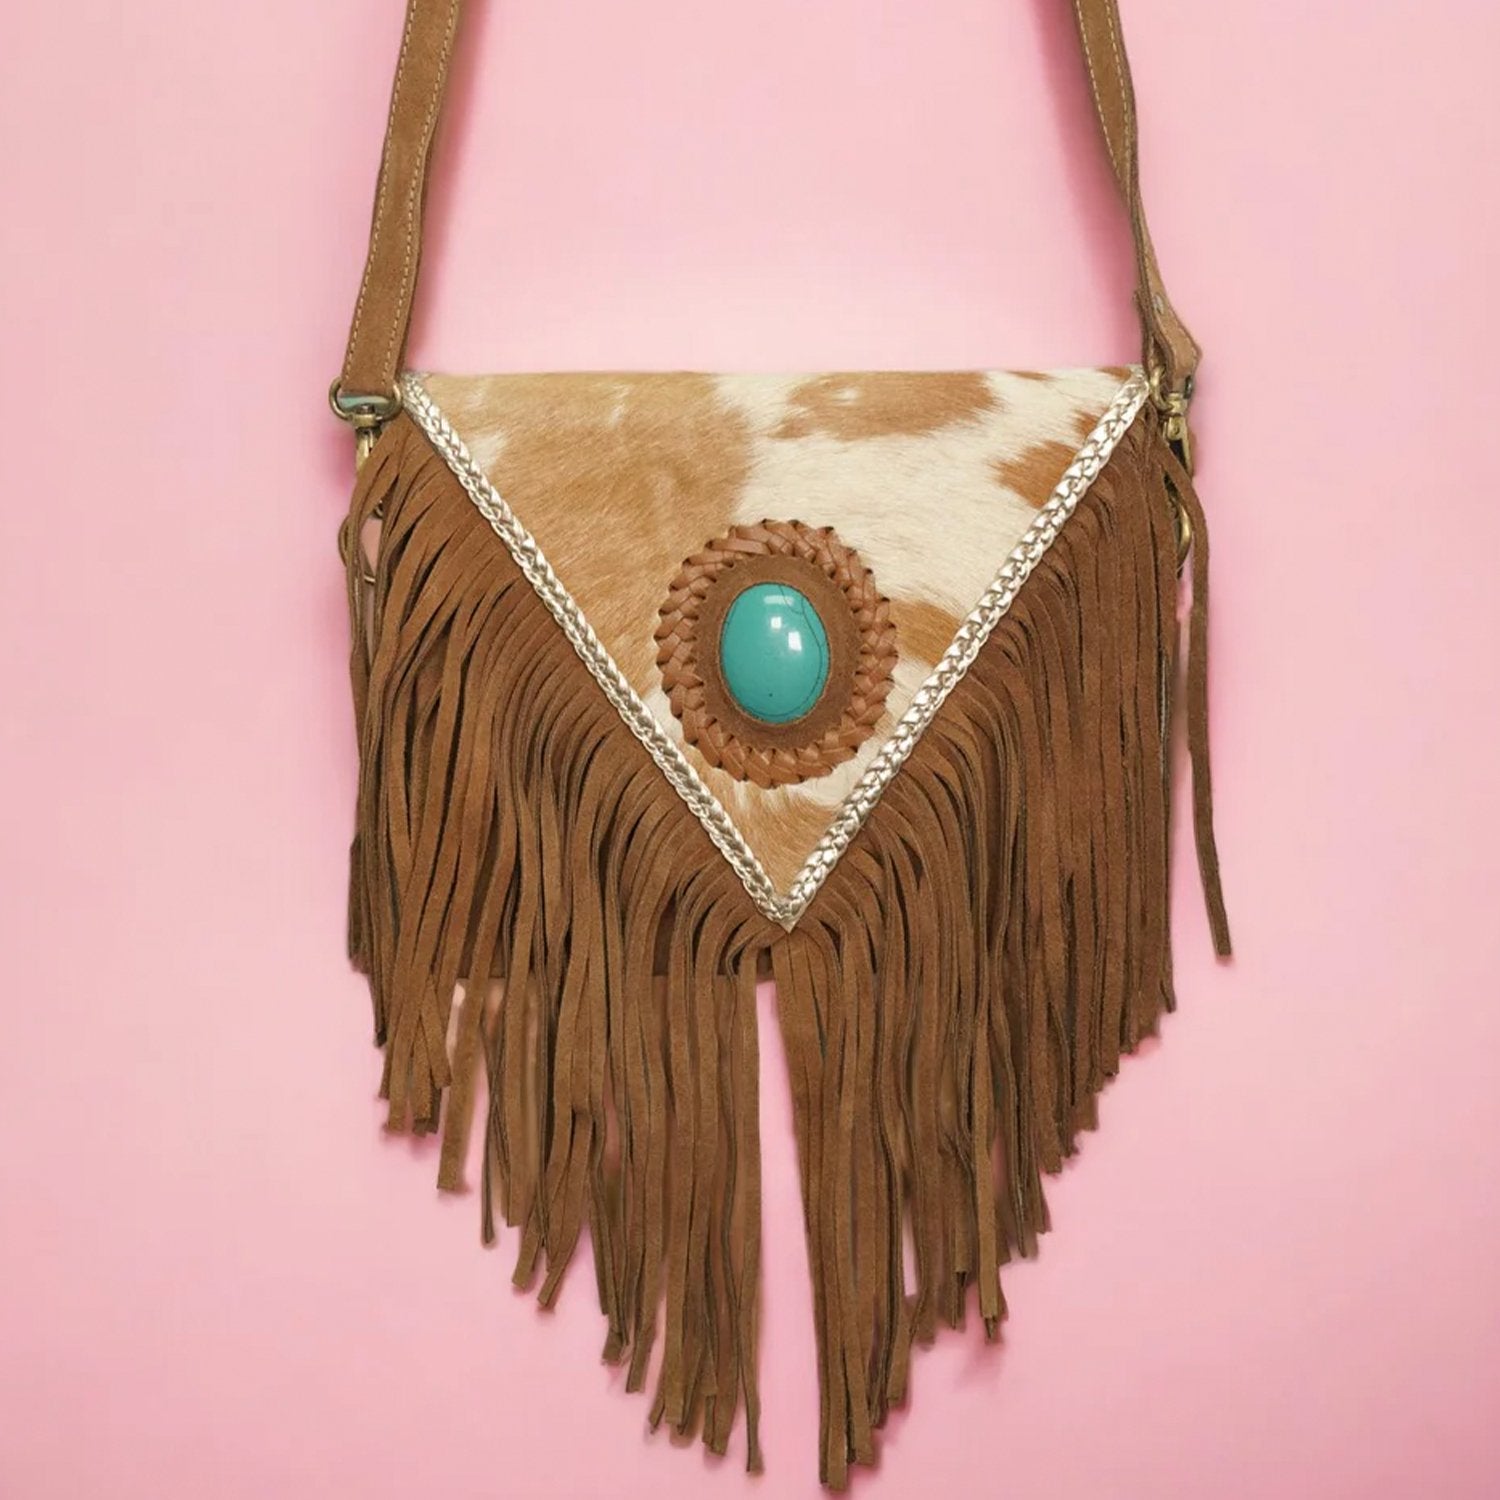 Triangle Cowhide purse with fringe - Rodeo Cowhide RugsBrown